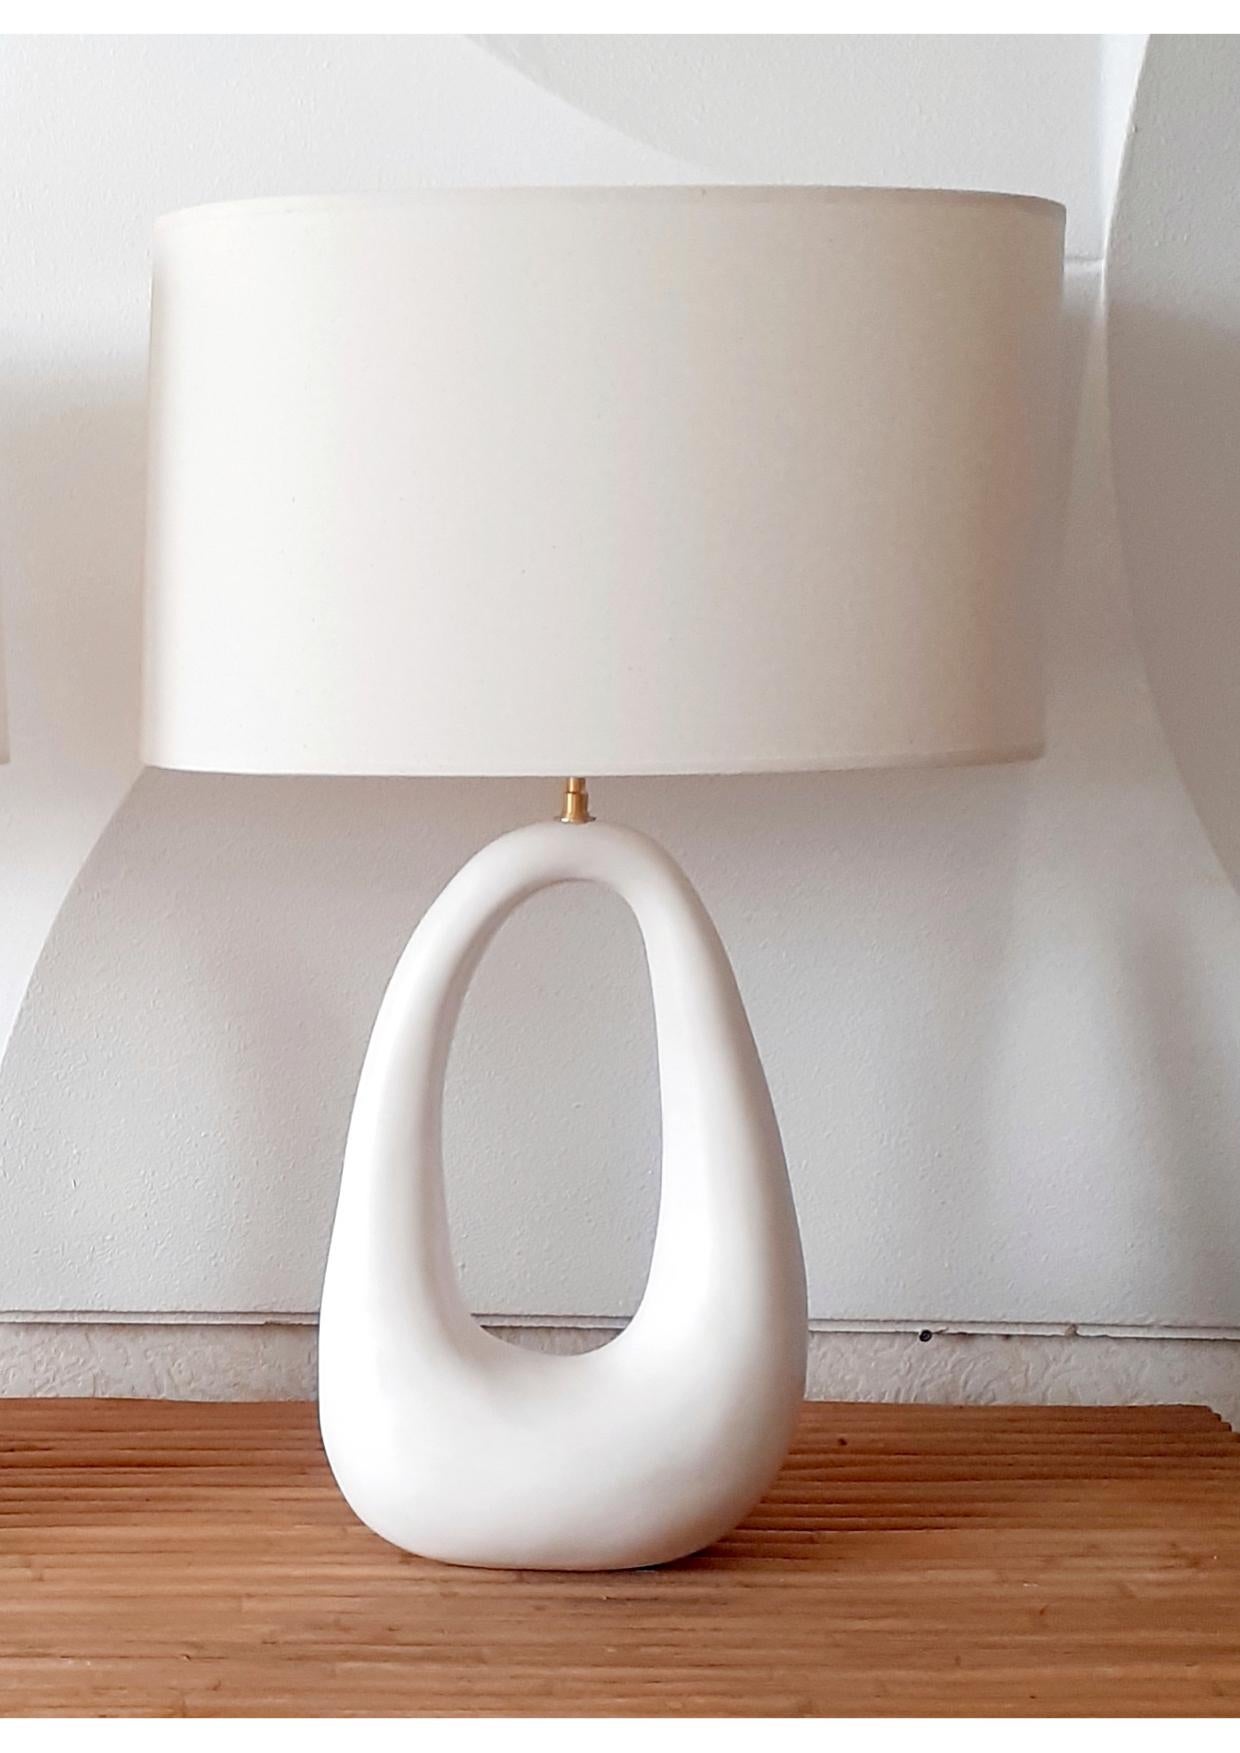 - Elegant ceramic lamp with shade, handmade in Parisian workshop by Elsa Foulon Studio.
Mineral, organic and sensual shape.
Cotton shade, brass structure, soft white enameled ceramic, screw bulb.
UL listed electricity on request.
Measures: